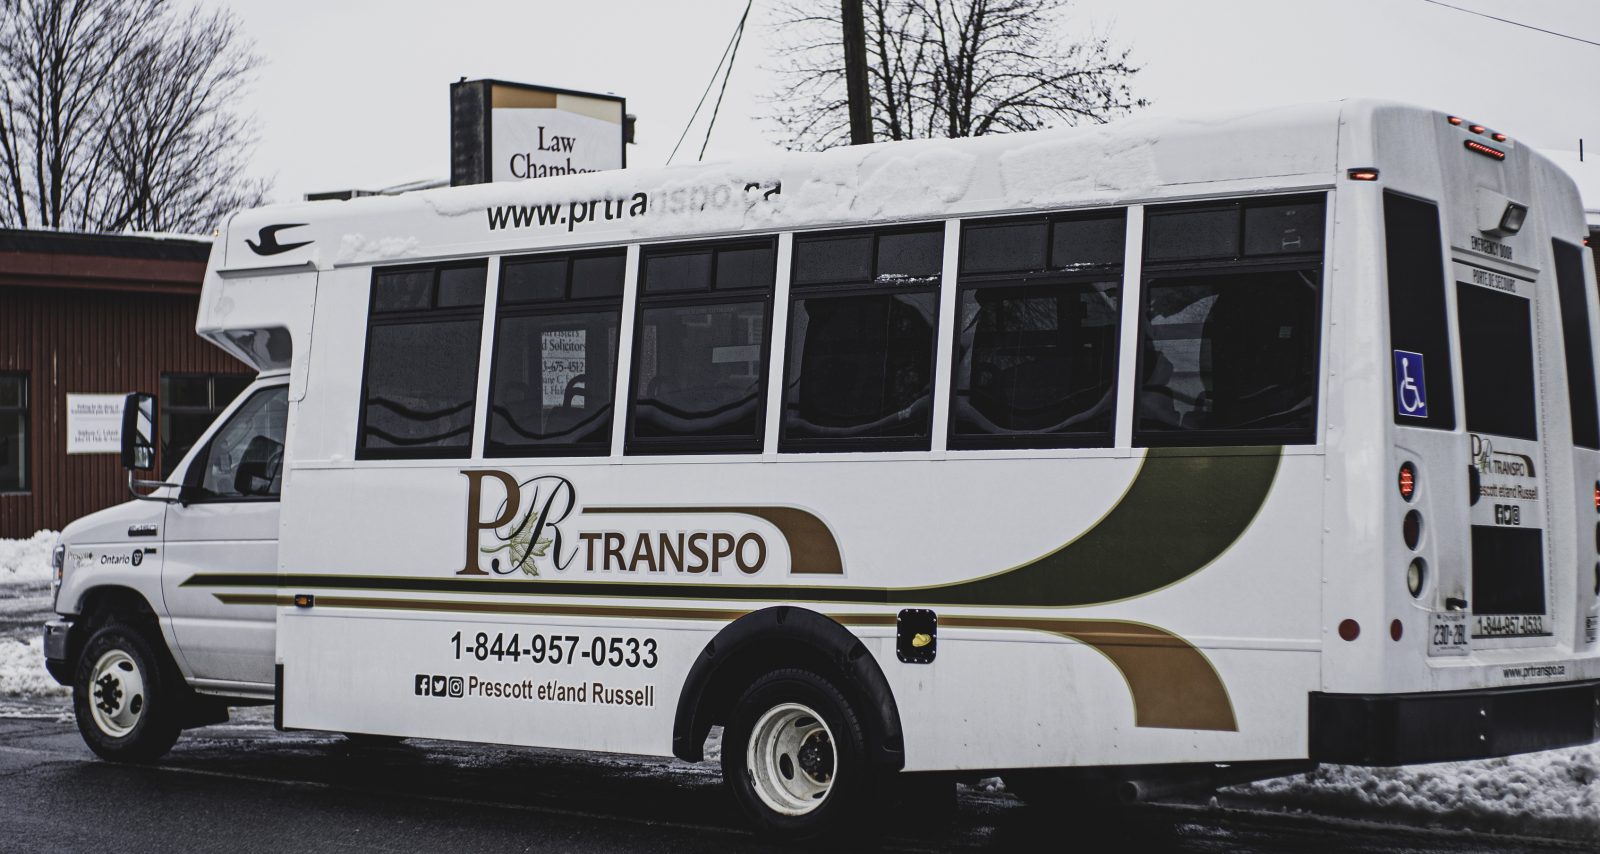 PR Transpo gets back on the road with a new plan